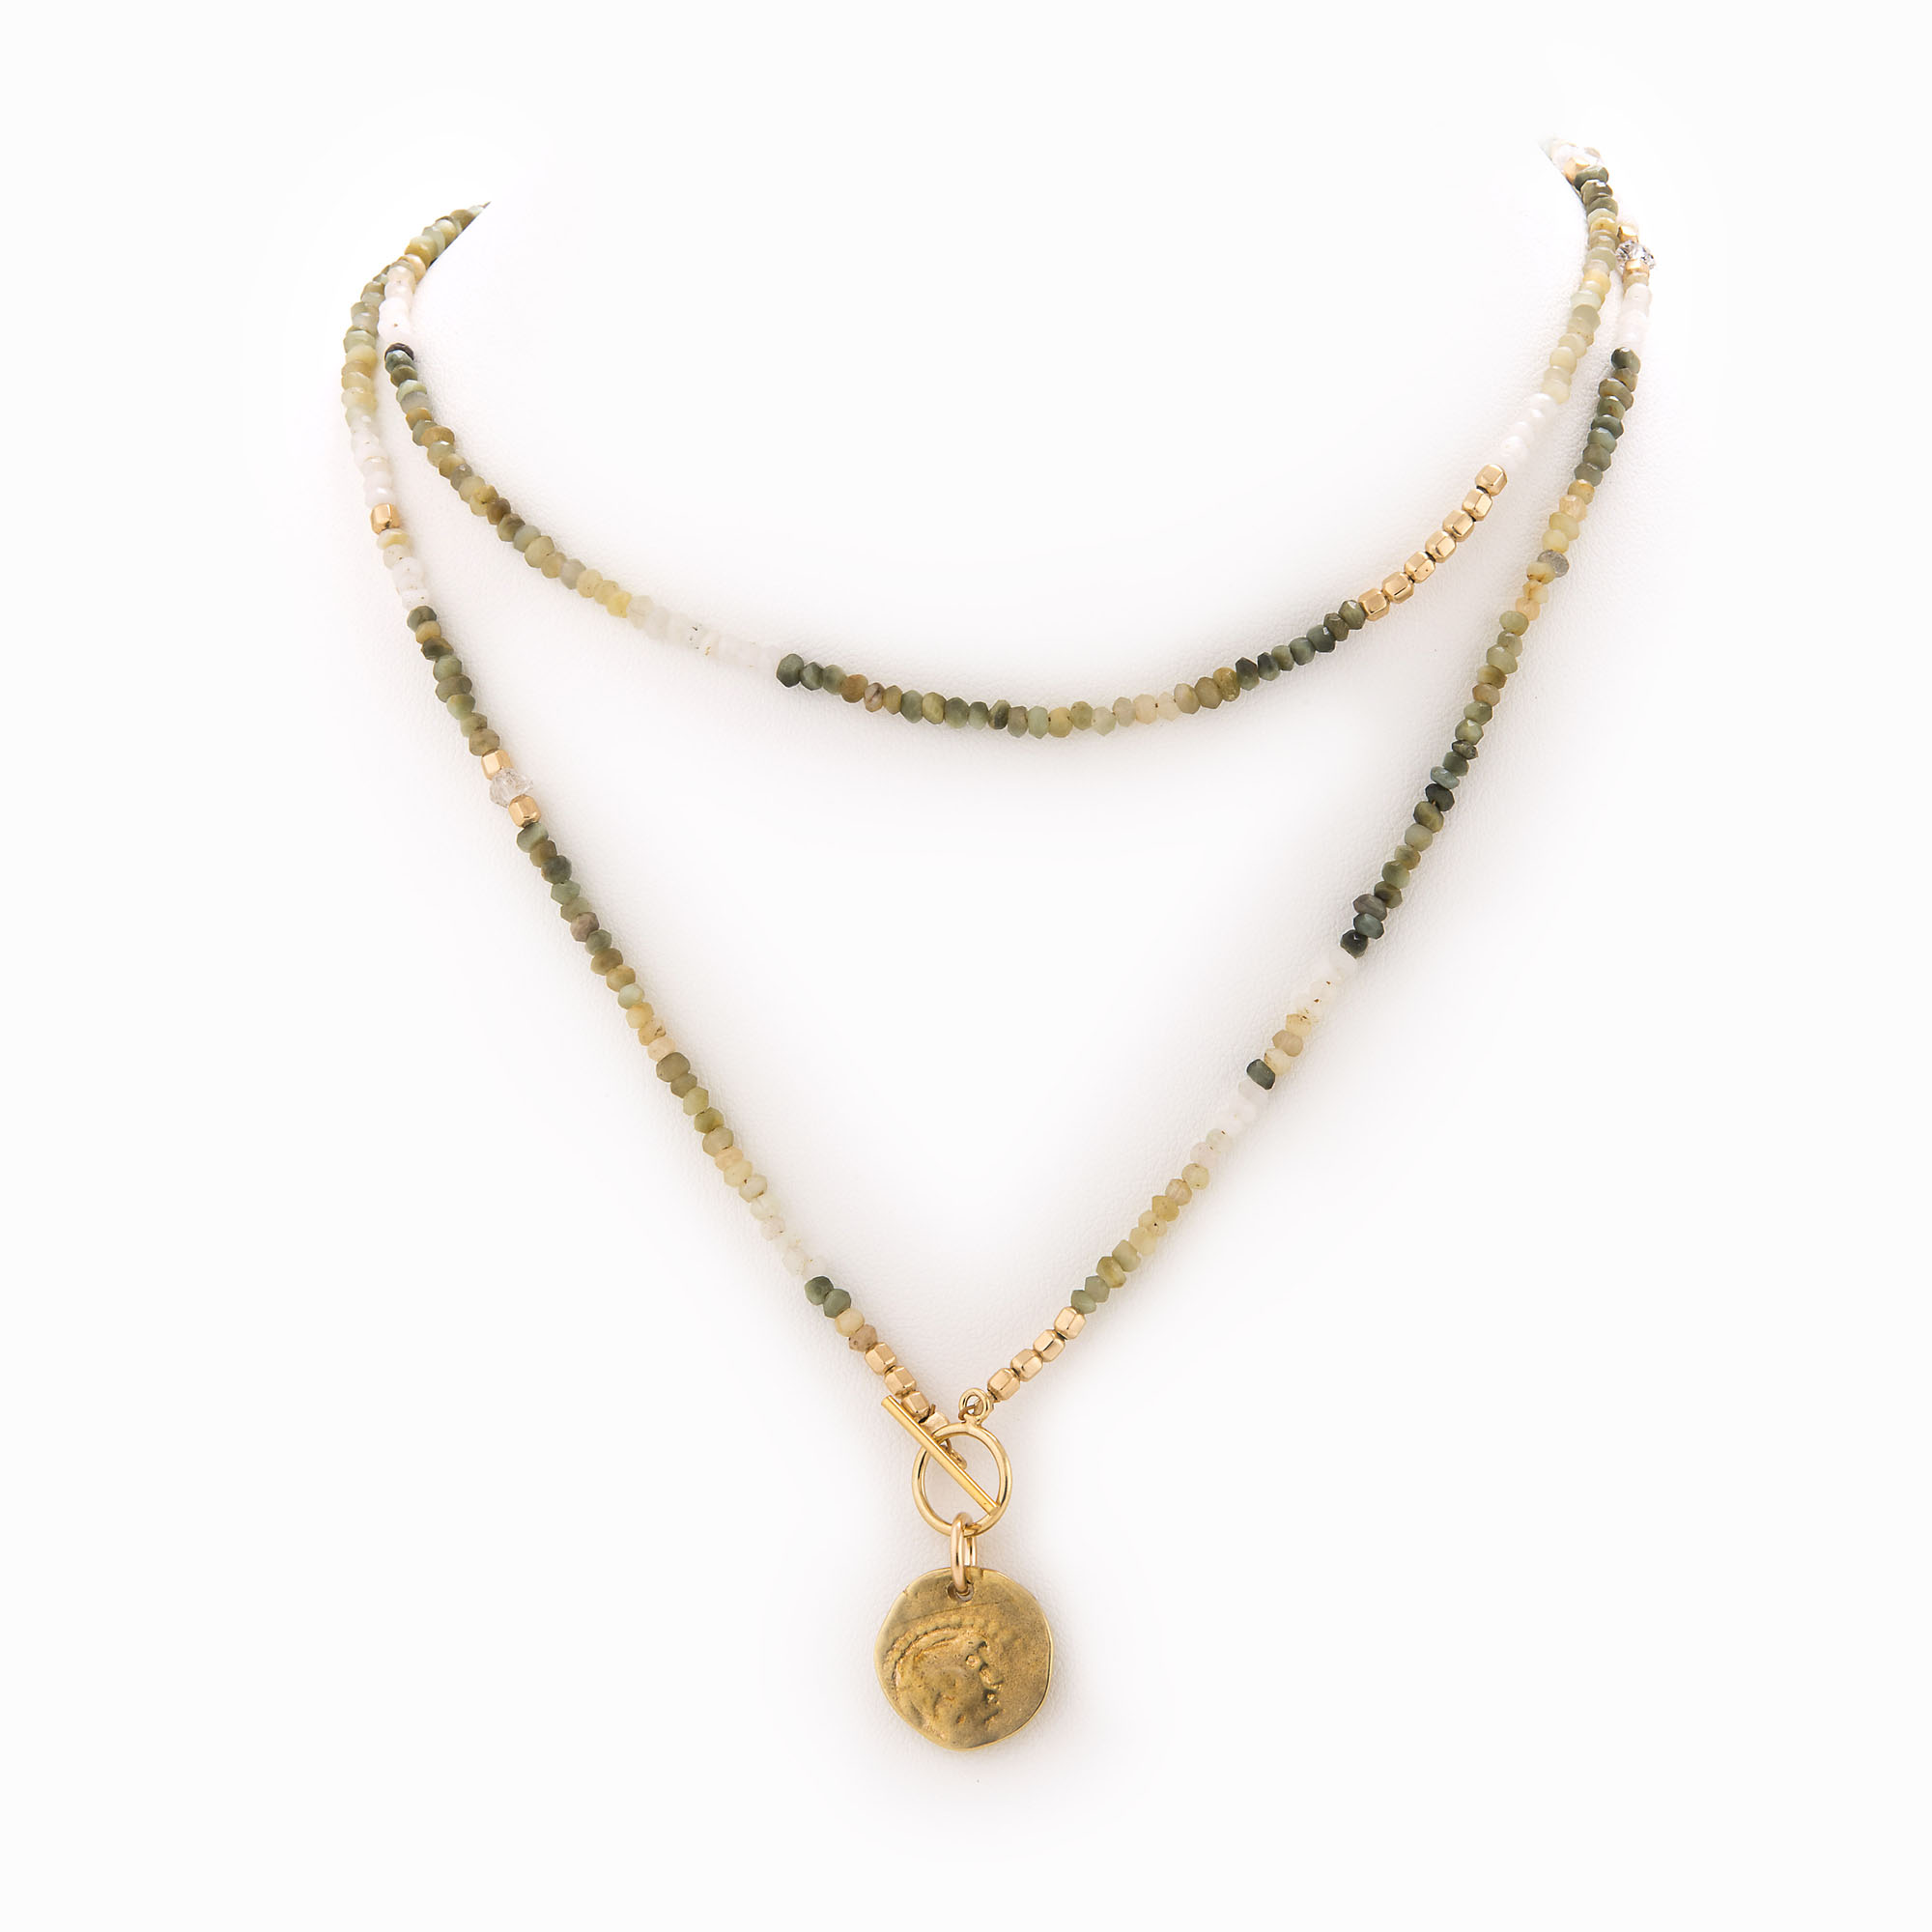 Featured image for “Alenia Stone Necklace”